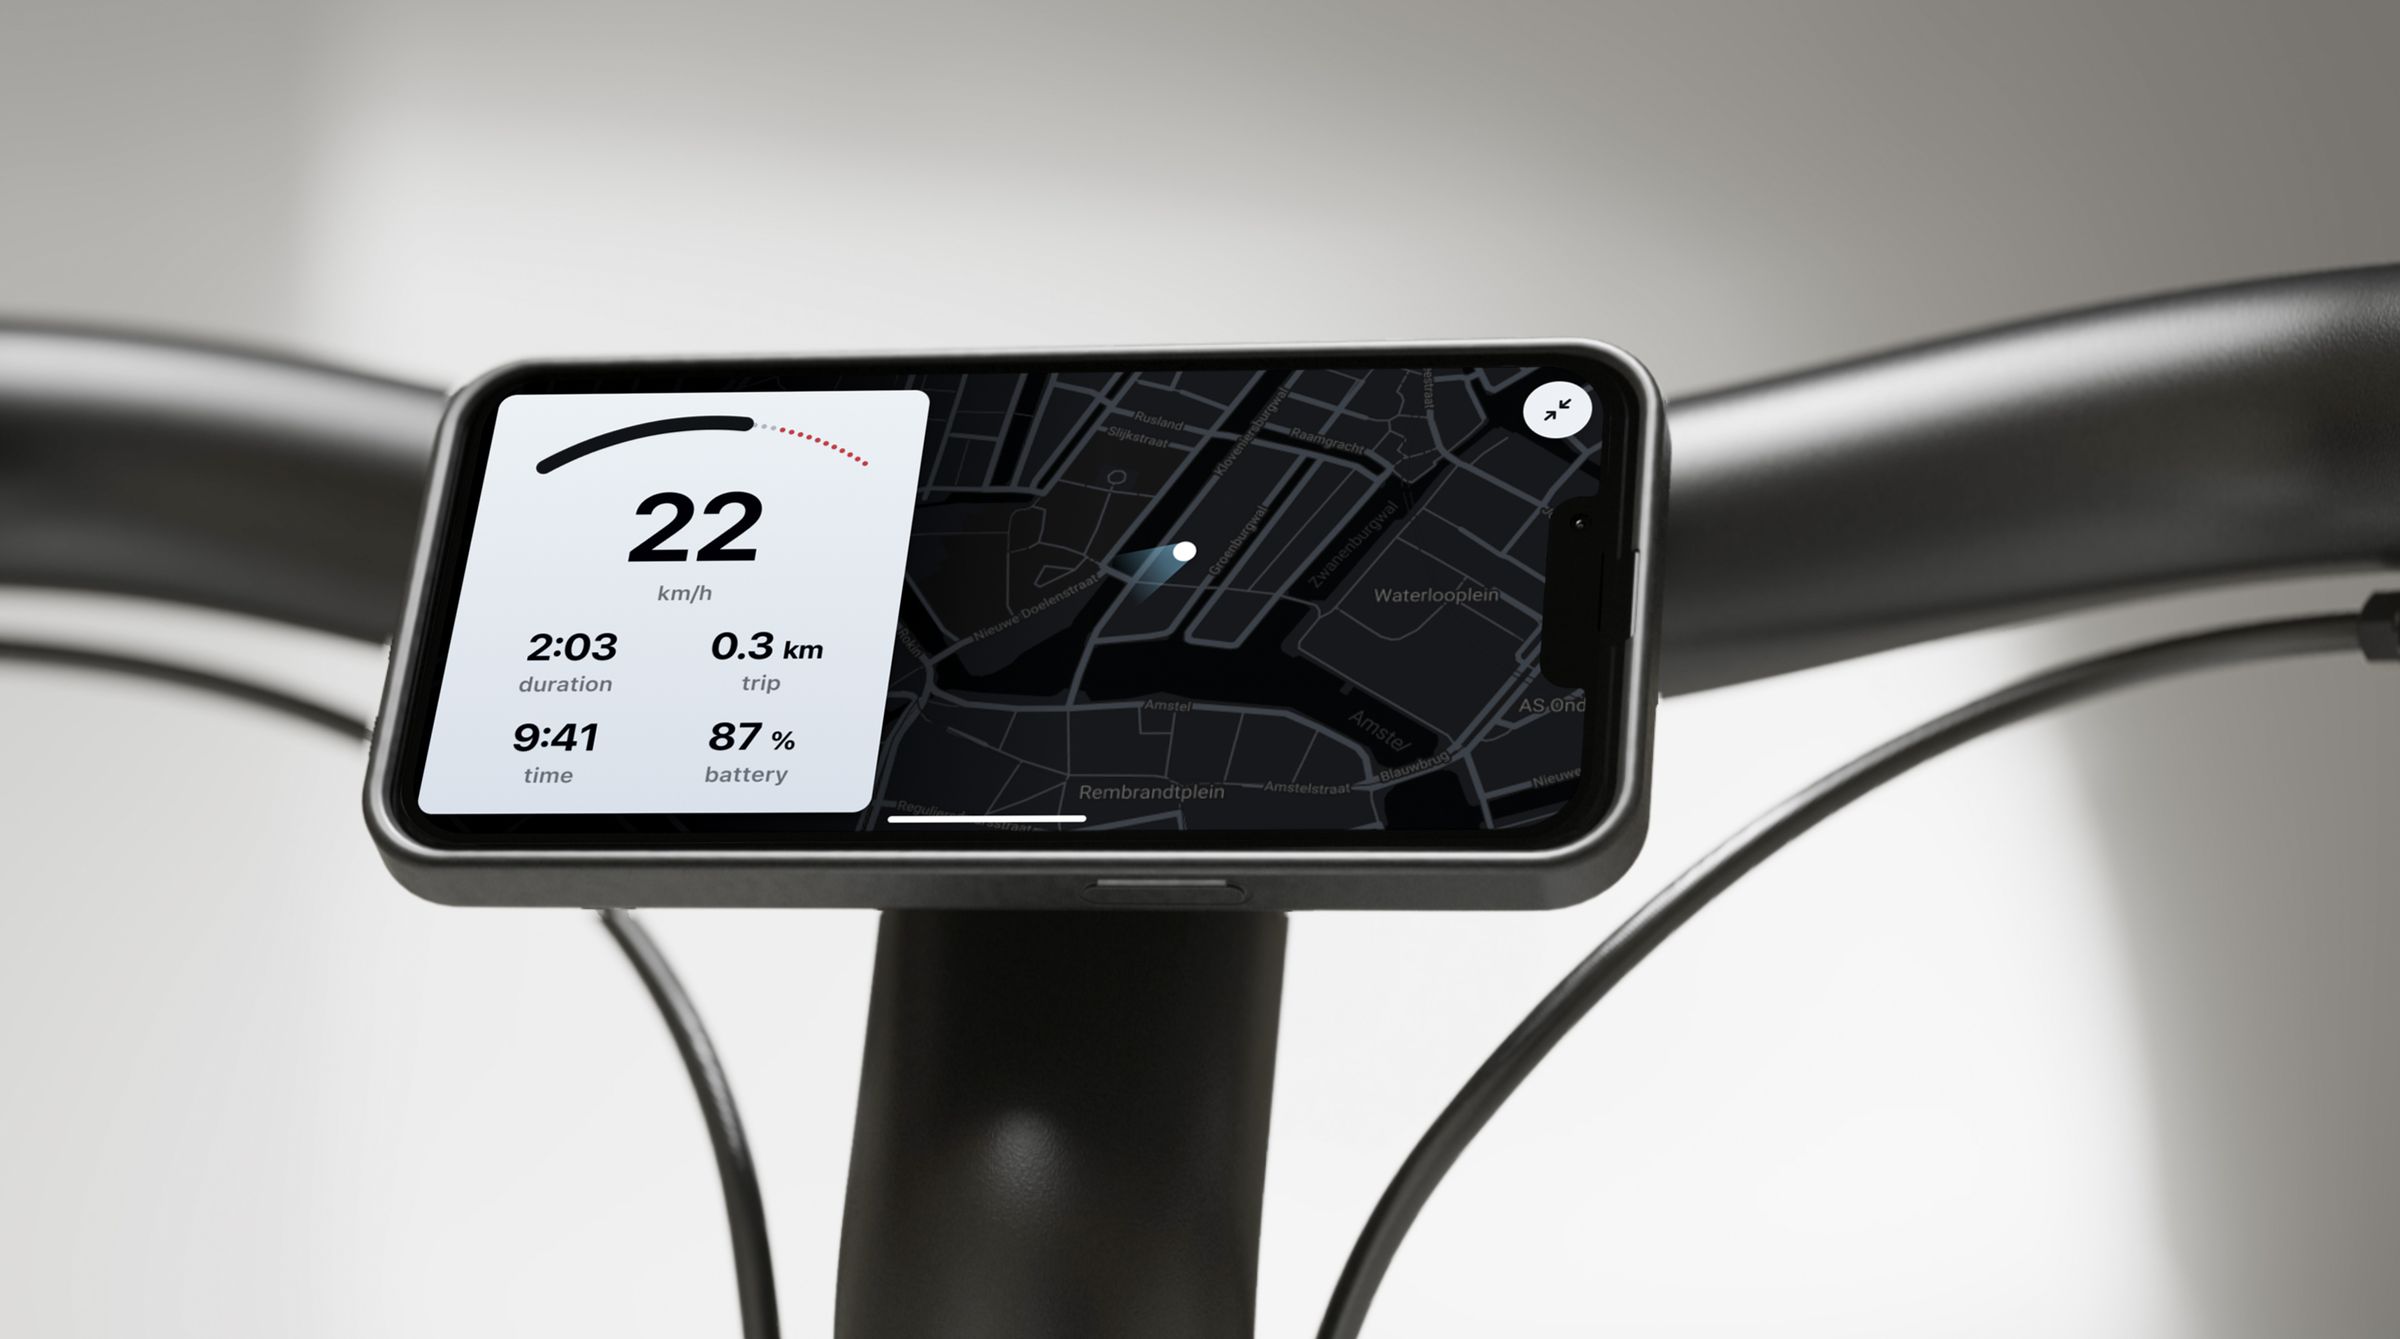 The VanMoof app can be used as a dashboard with optional phone mount and new USB-C charging jack under the handlebar.